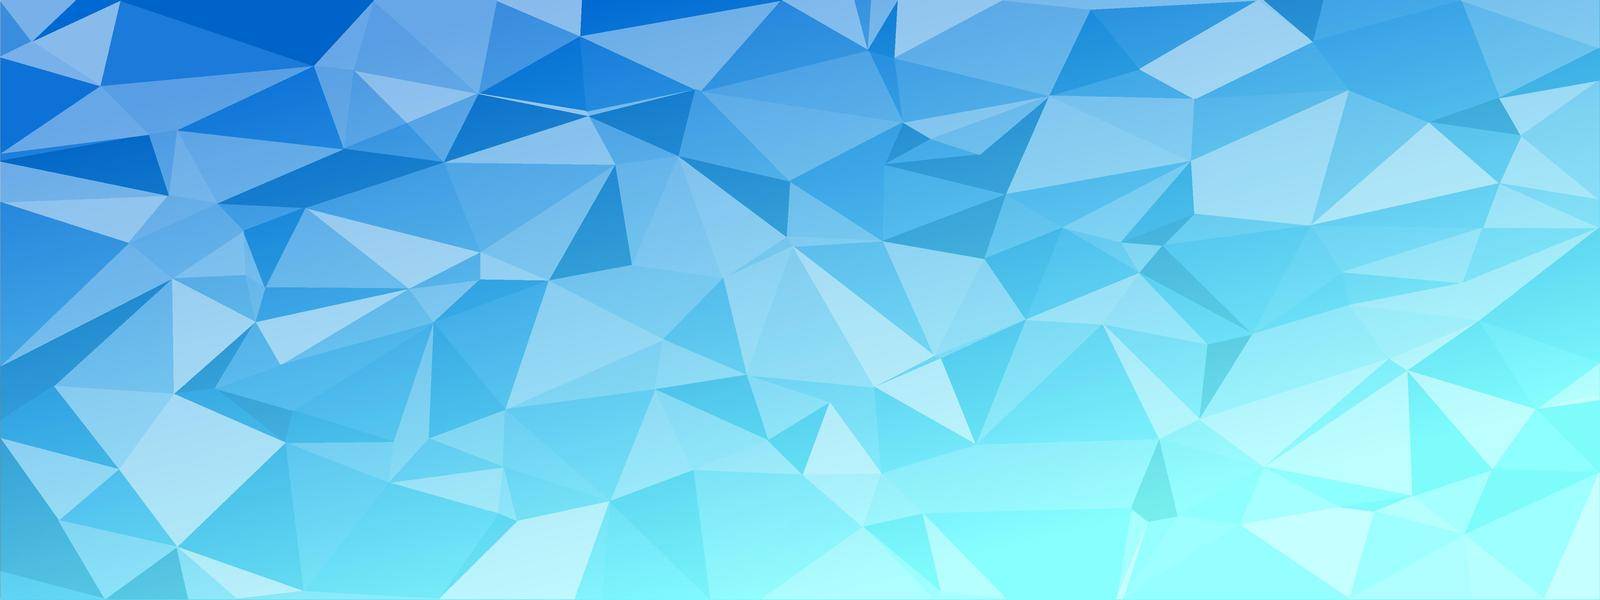 low poly abstract modern background. bright colors chaotic triangles of variable size and rotation. Minimalist layout for business card landing page wallpaper website brochure. Trendy vector eps10